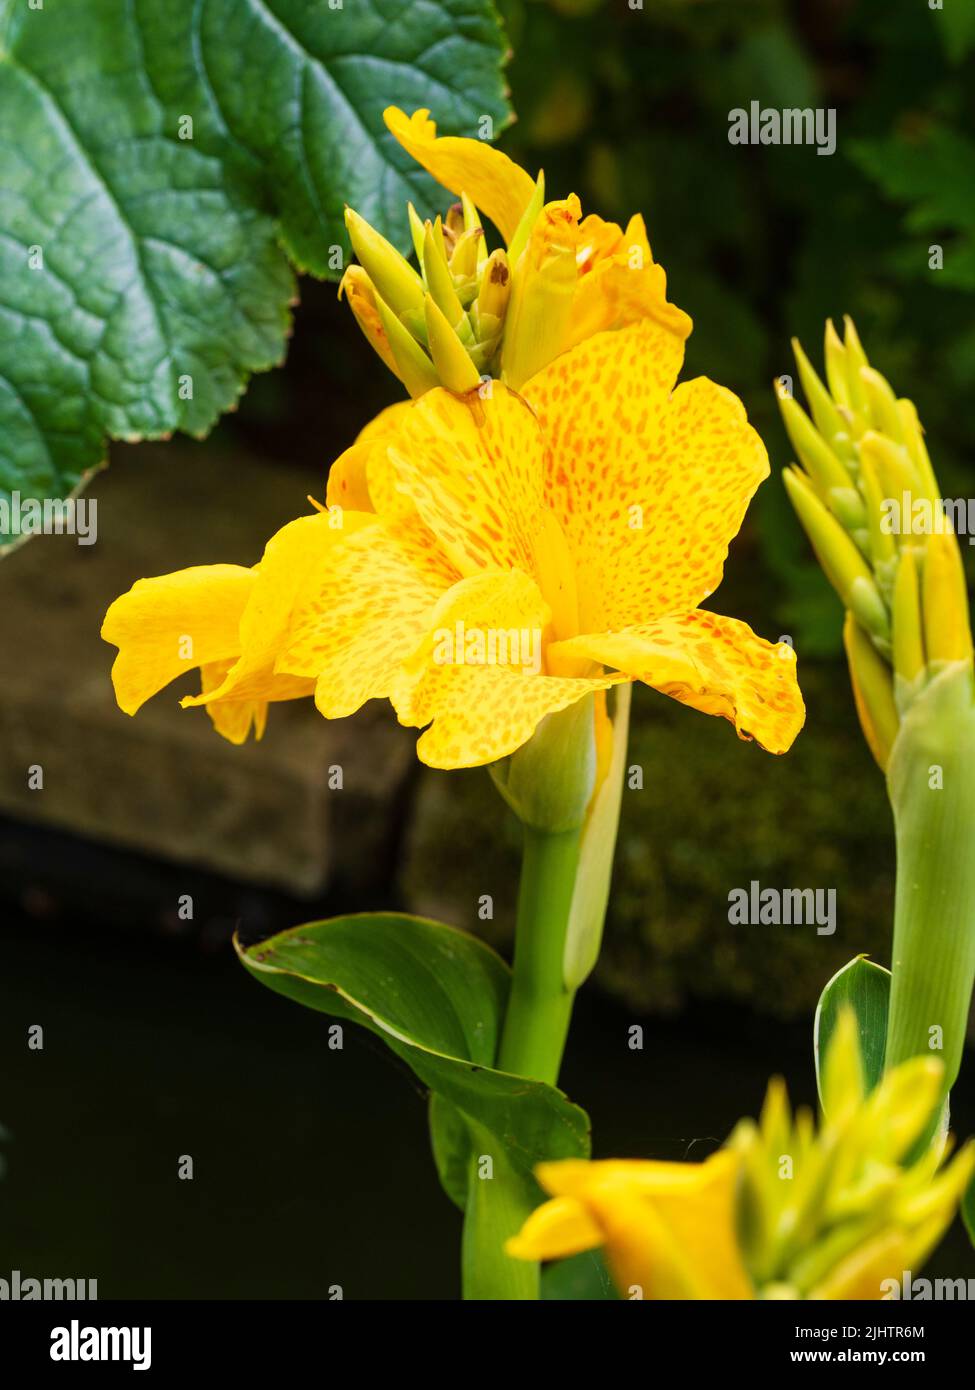 Red spotted yellow flowers of the Happy series Canna 'Emily' growing as a half hardy marginal aquatic in a small UK garden pond Stock Photo